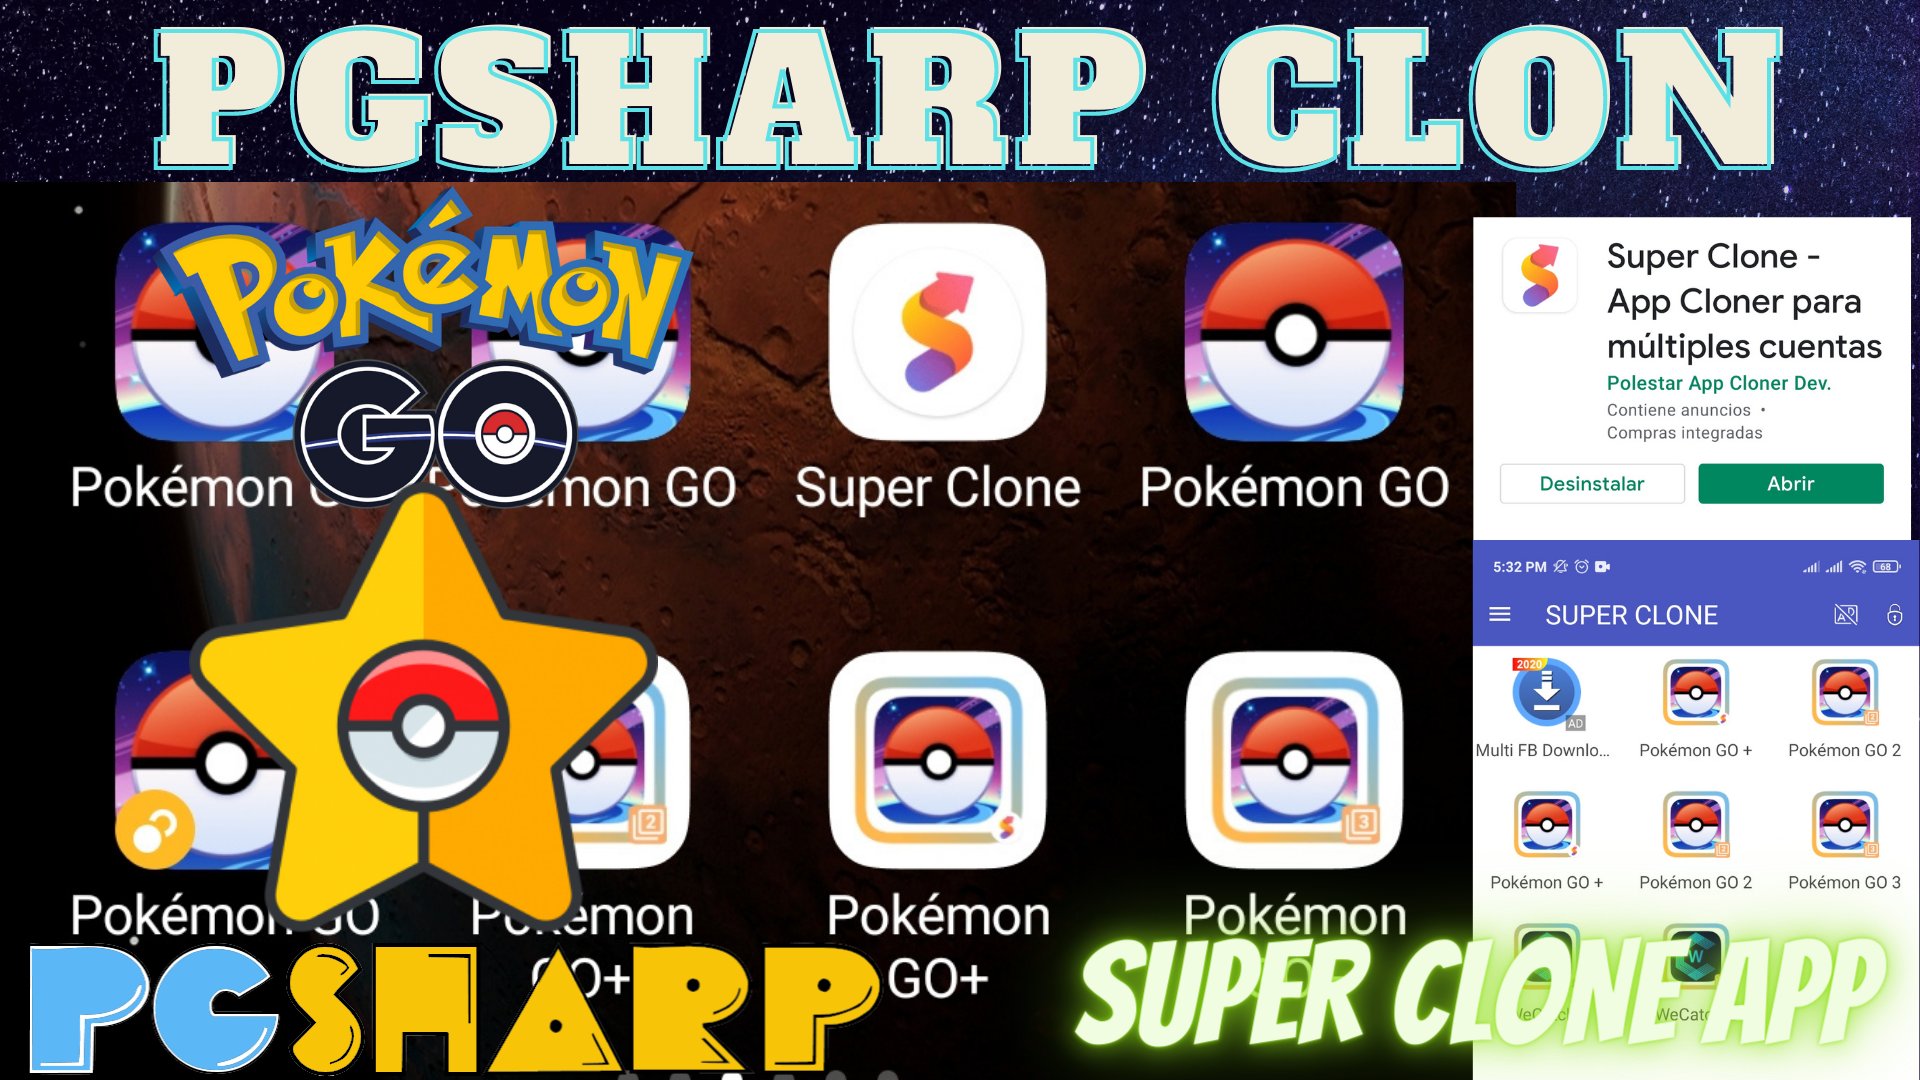 Super Clone - App Cloner for Multiple Accounts APK for Android